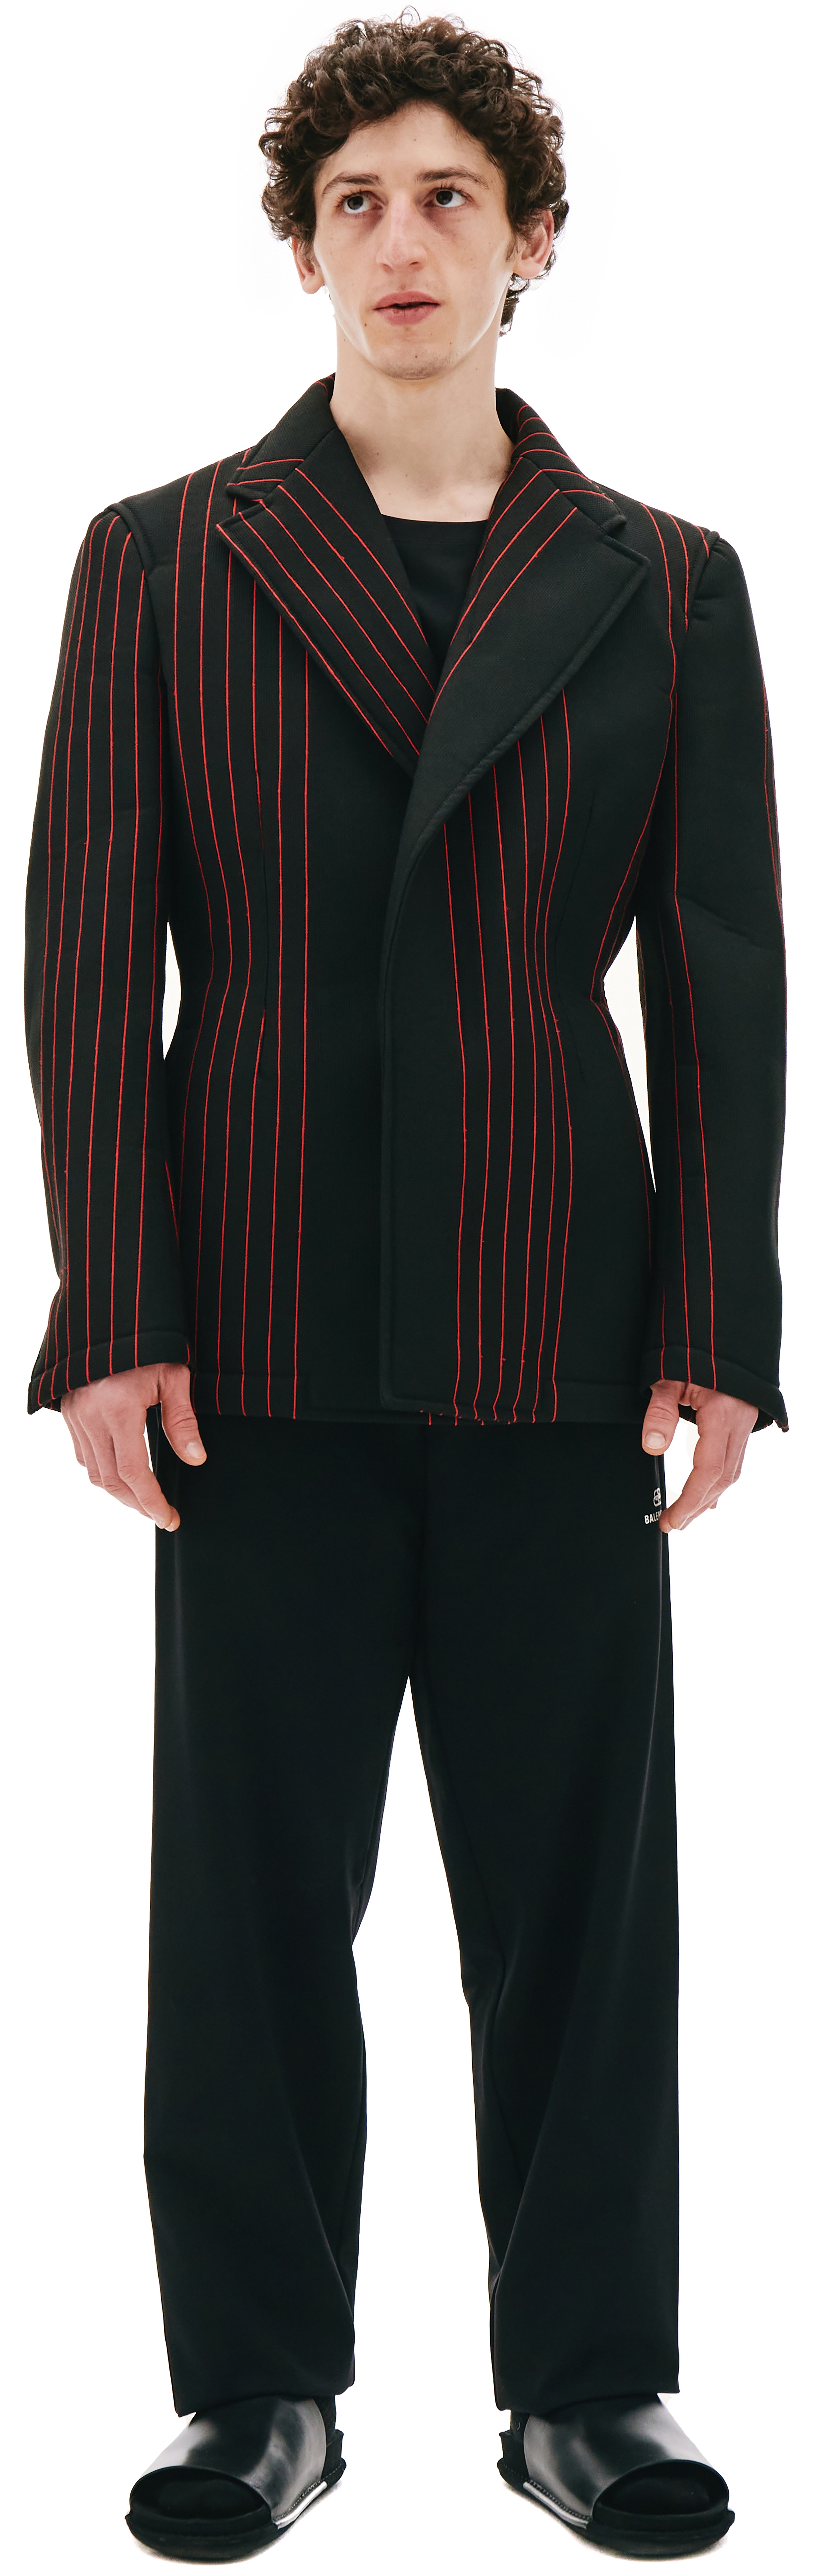 BLACK JACKET WITH RED STRIPES - 1